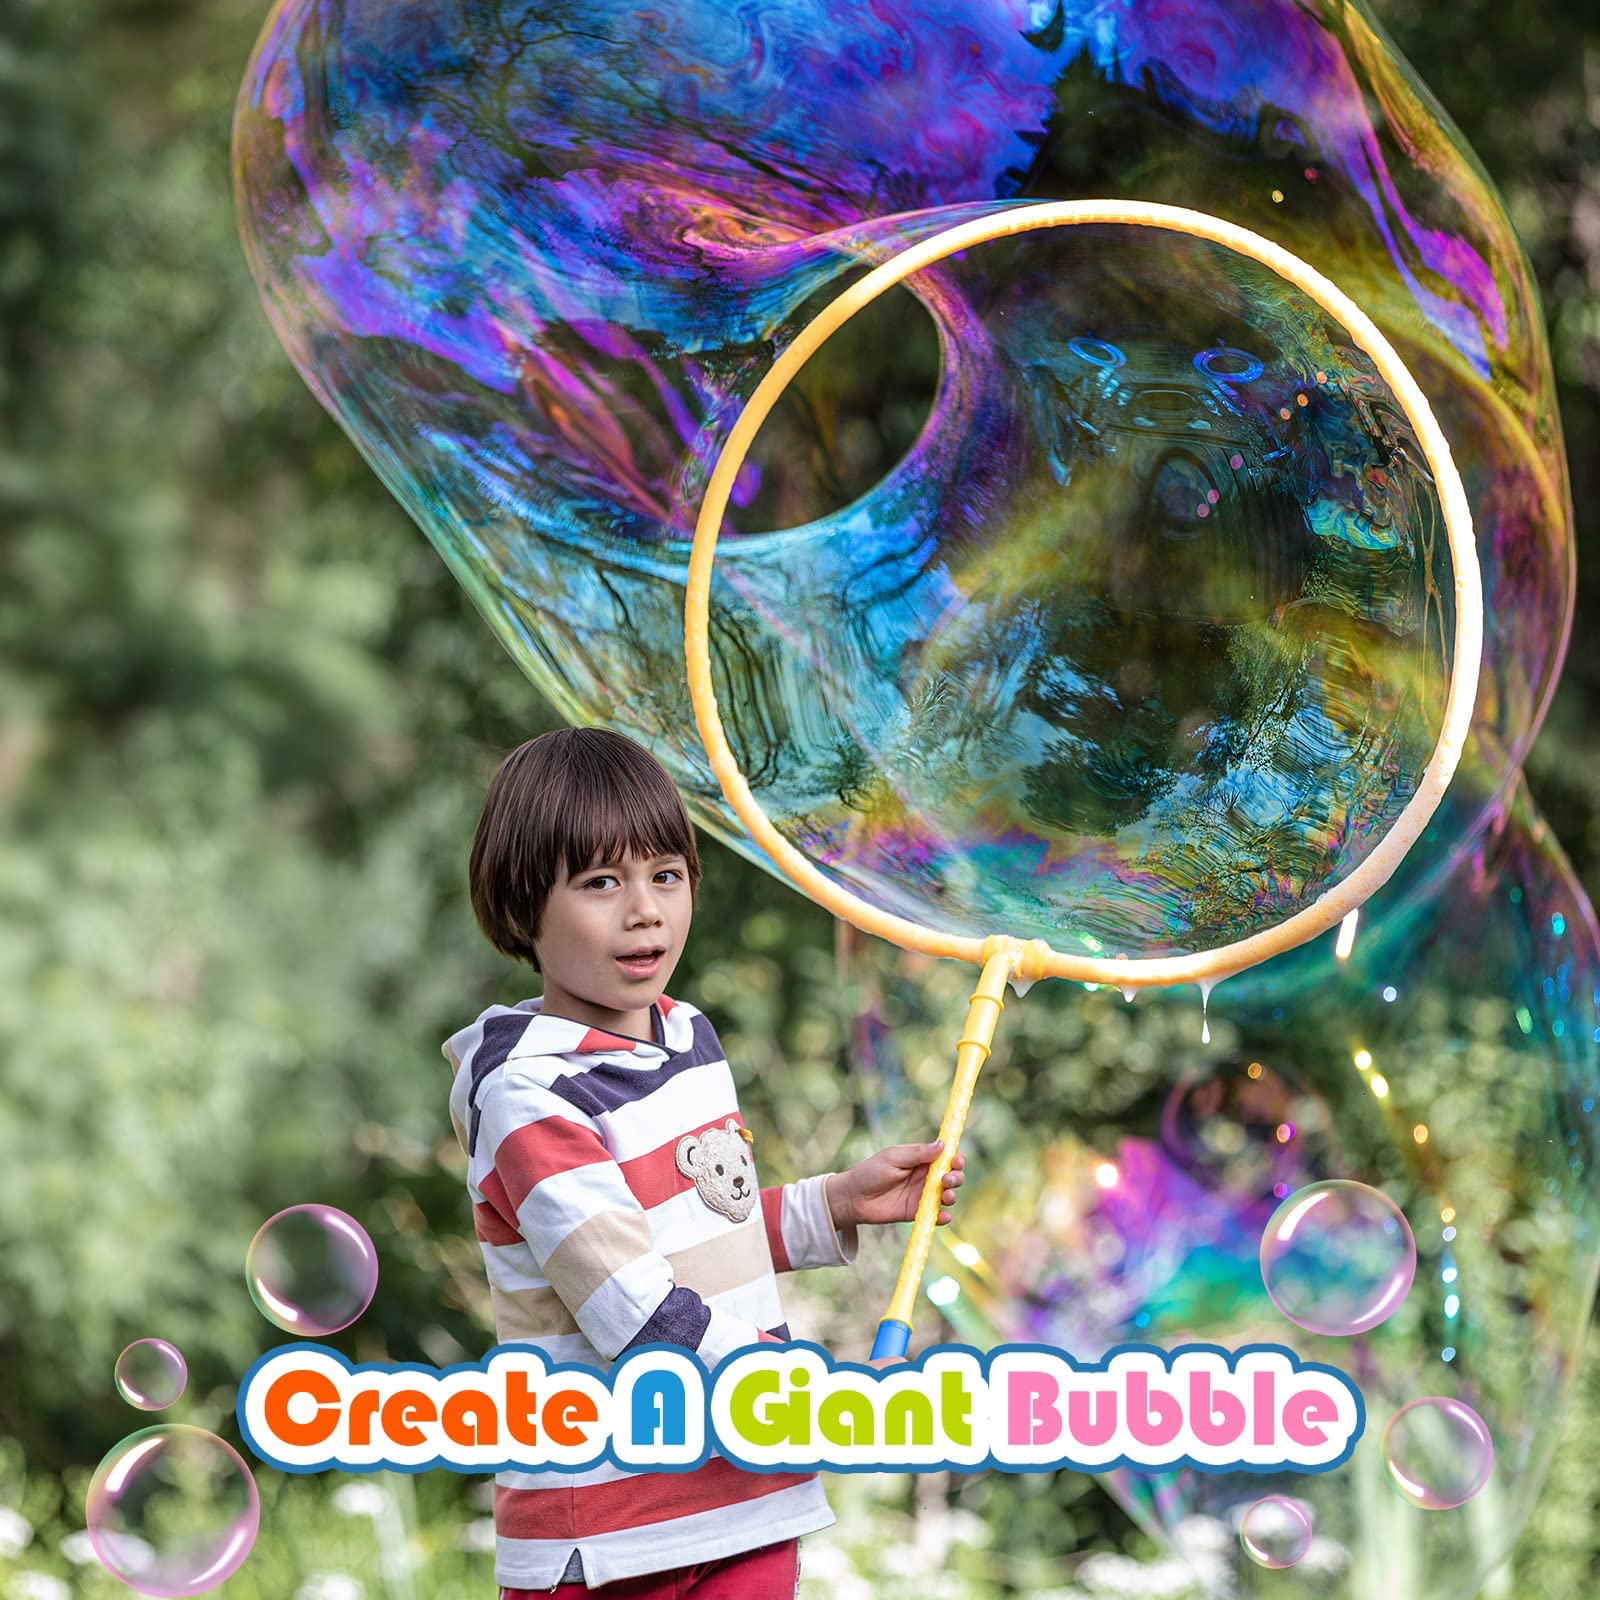 Kid in a Bubble Toy Giant Bubble Wand Big Bubbles Hoop with Dipping Pool Tray, Fun Outdoor Toys Playtime Activity Summer Toy Set for Kids and Adults Birthday Party Game (Basic Kit)